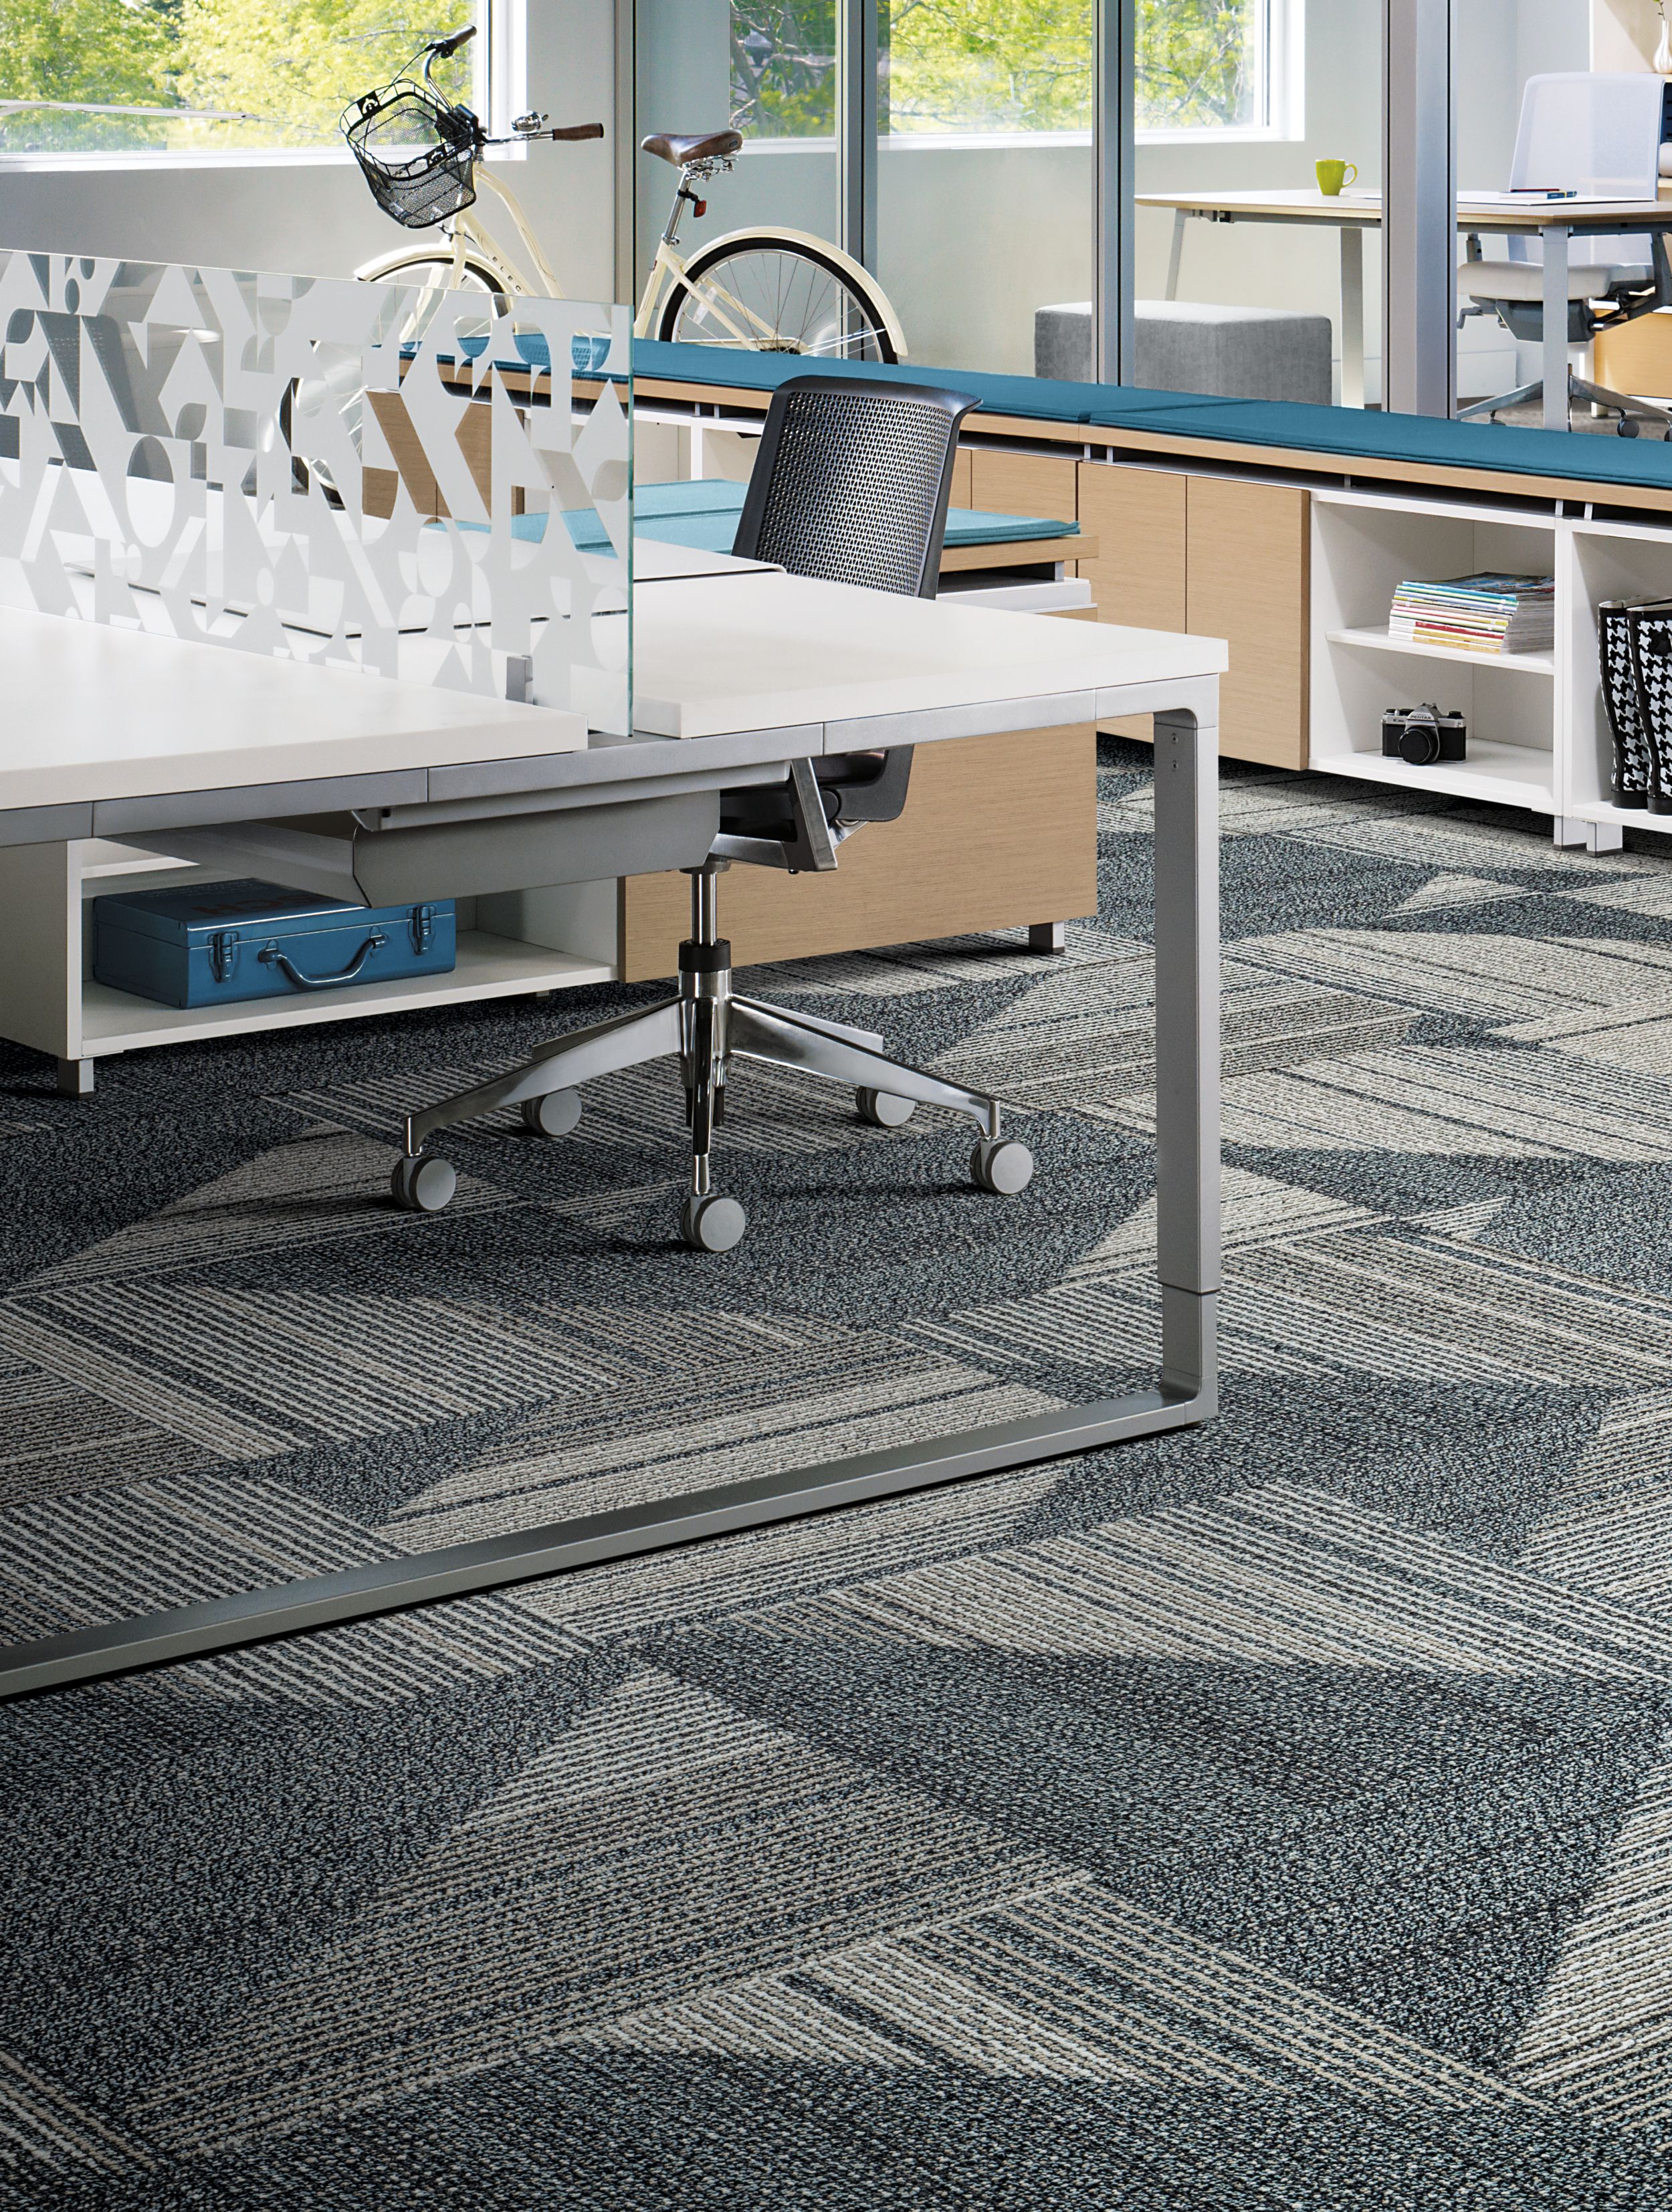 Interface Detours Ahead carpet tile in classroom area with tables and a chair numéro d’image 10